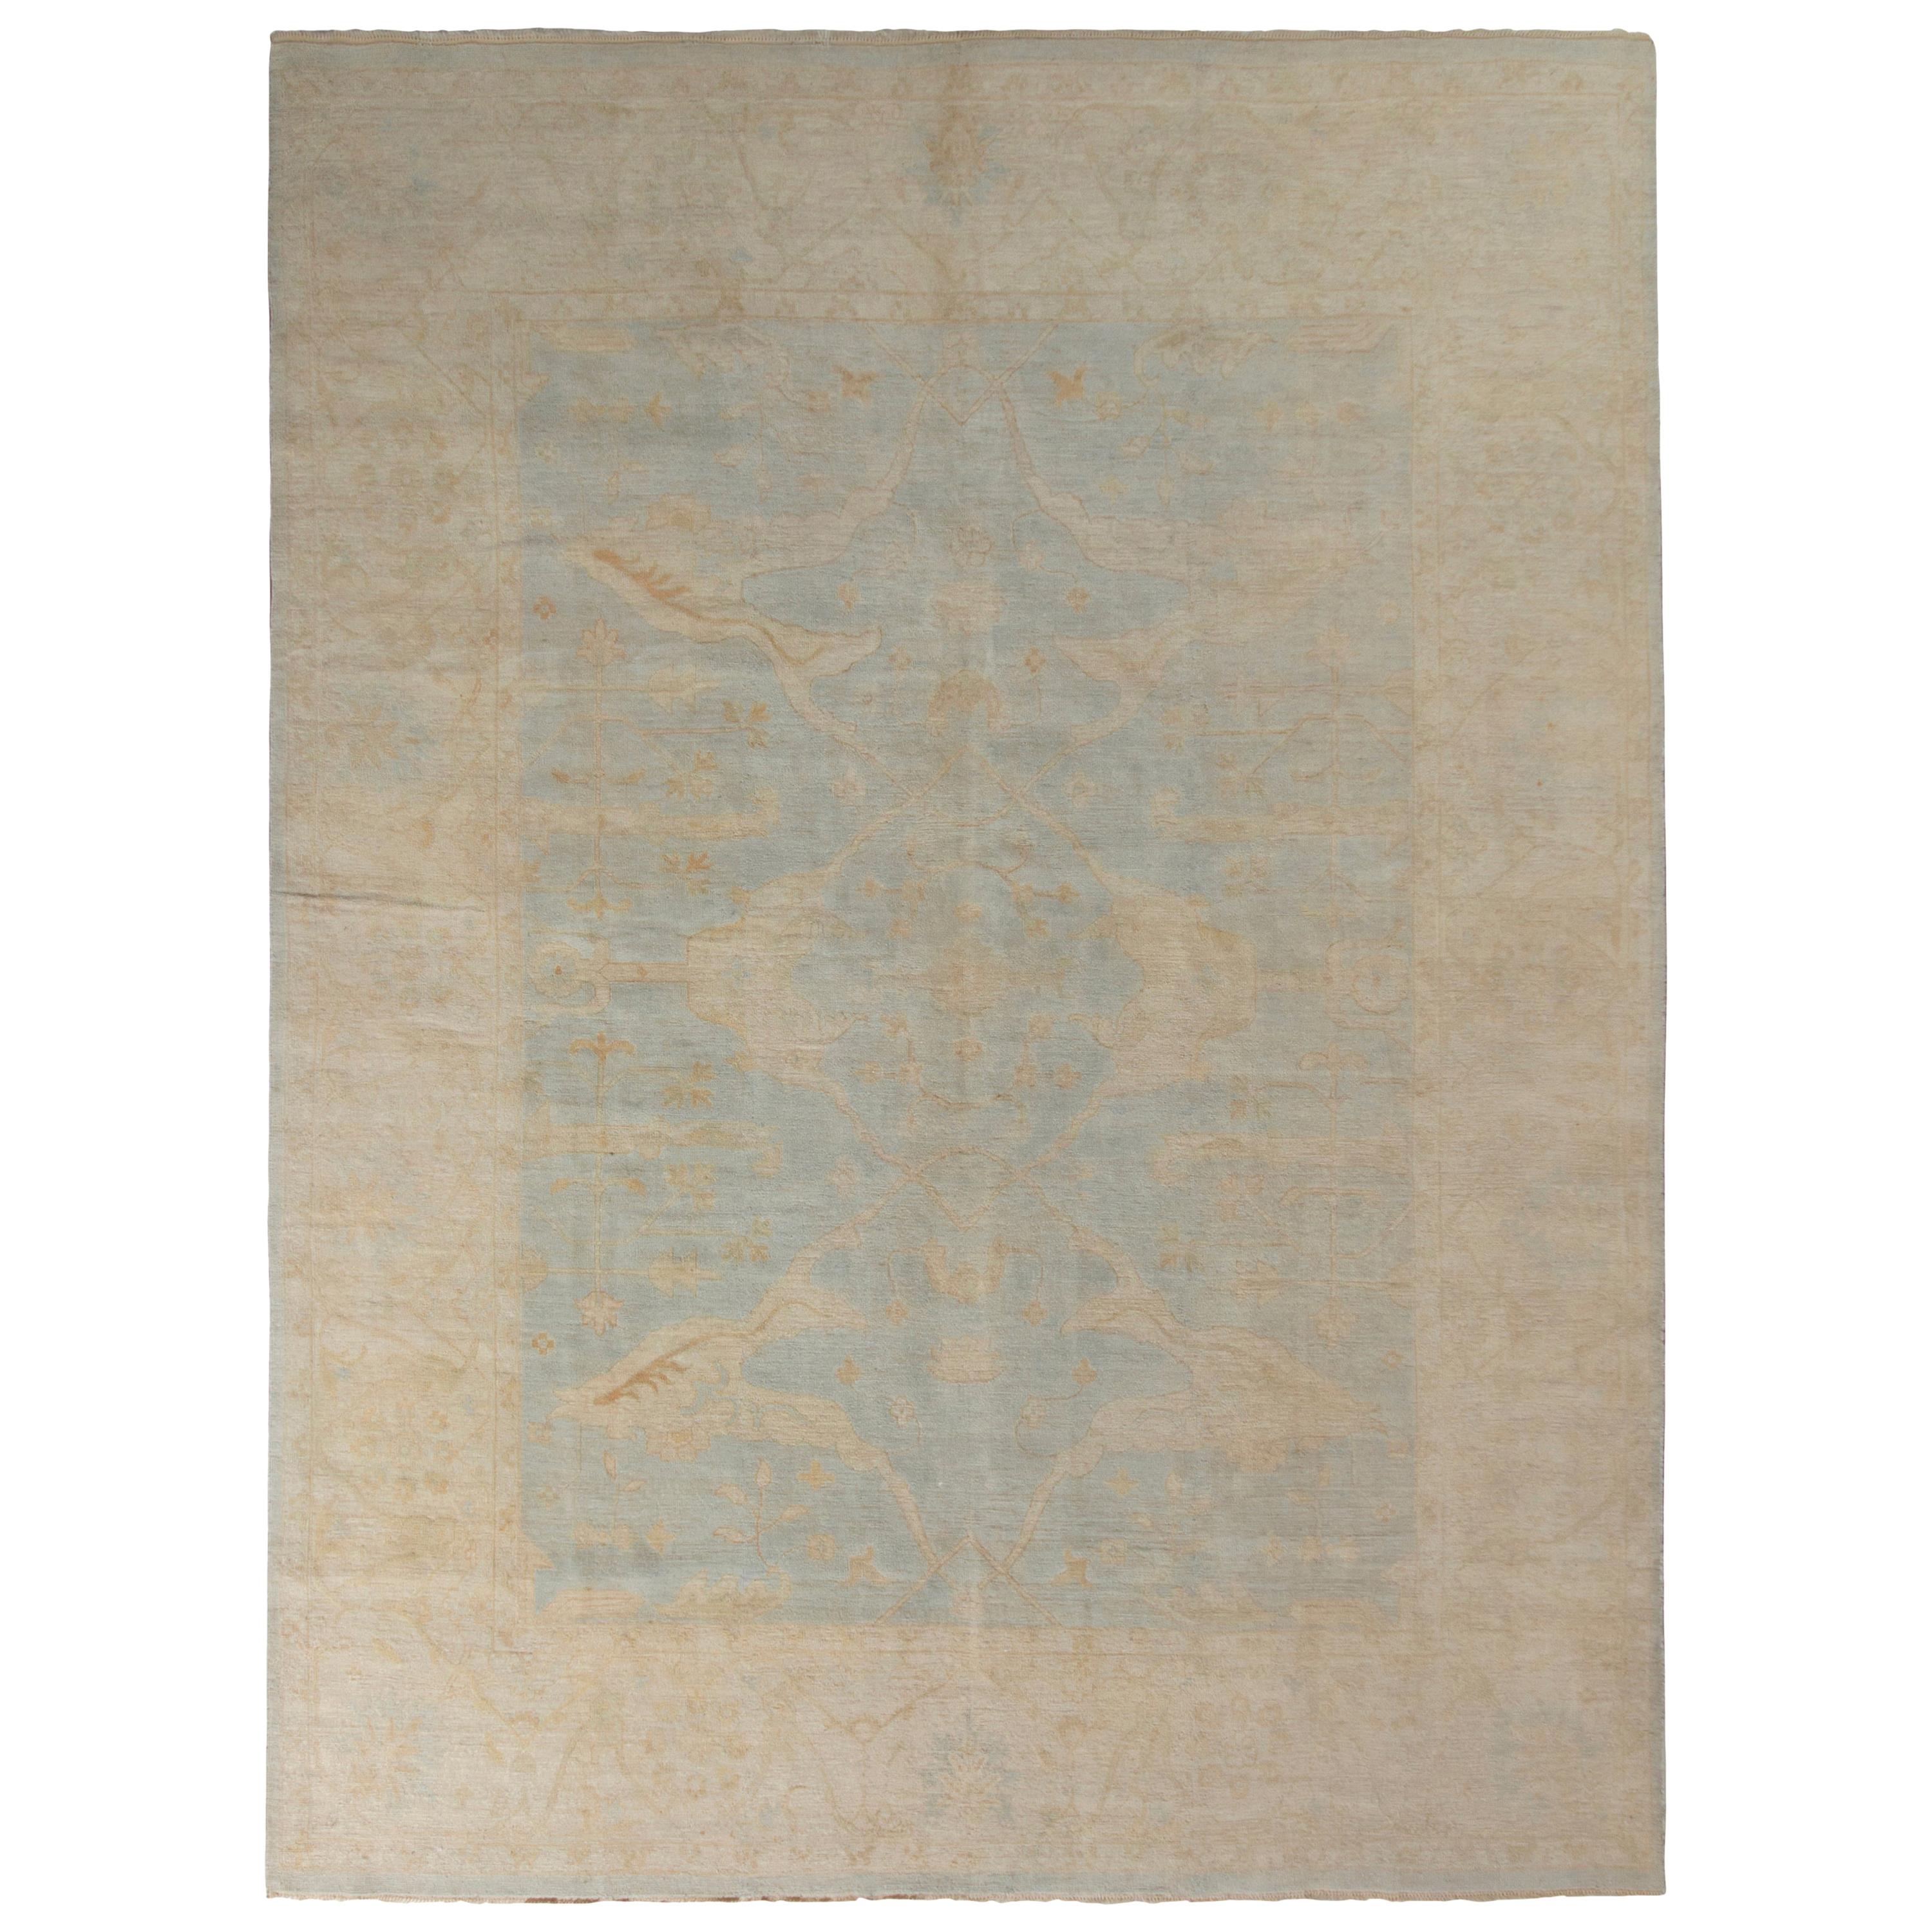 Rug & Kilim’s Transitional Oushak Style Rug in Beige and Blue Floral Pattern